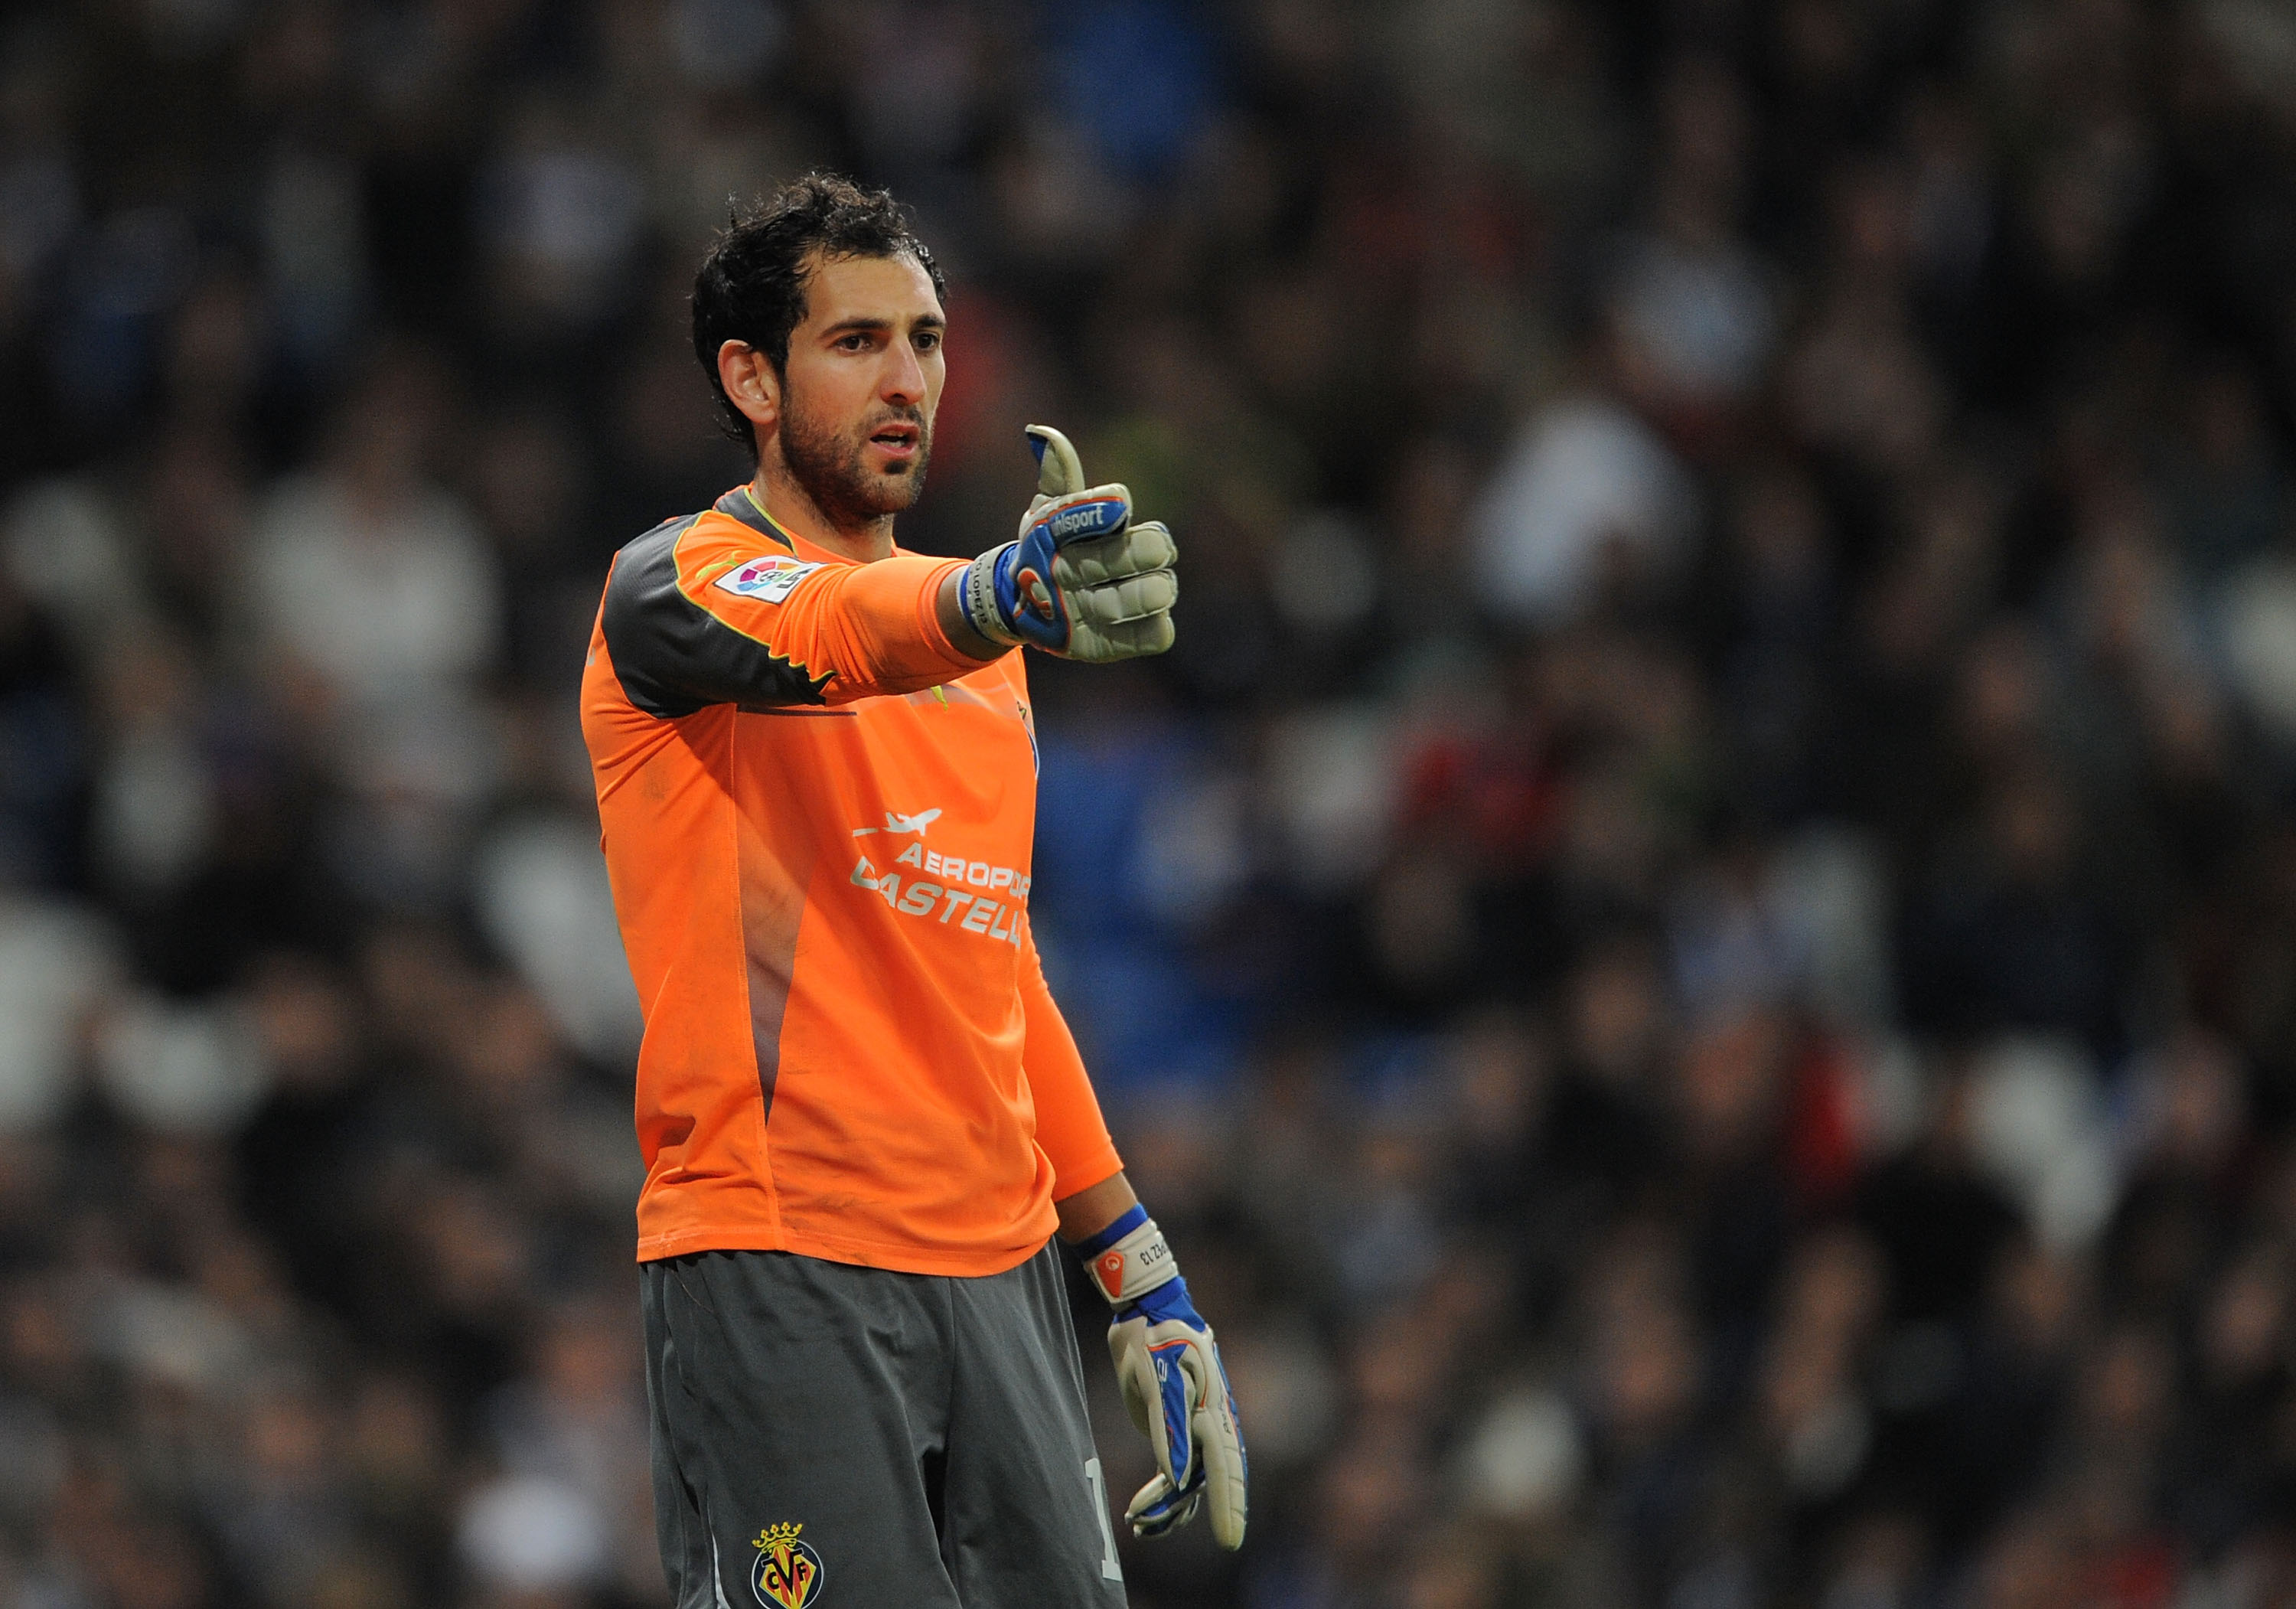 MADRID, SPAIN - JANUARY 09:  Diego Lopez of Villarreal signals to a teammate during the La Liga match between Real Madrid and Villarreal at Estadio Santiago Bernabeu on January 9, 2011 in Madrid, Spain.  (Photo by Denis Doyle/Getty Images)